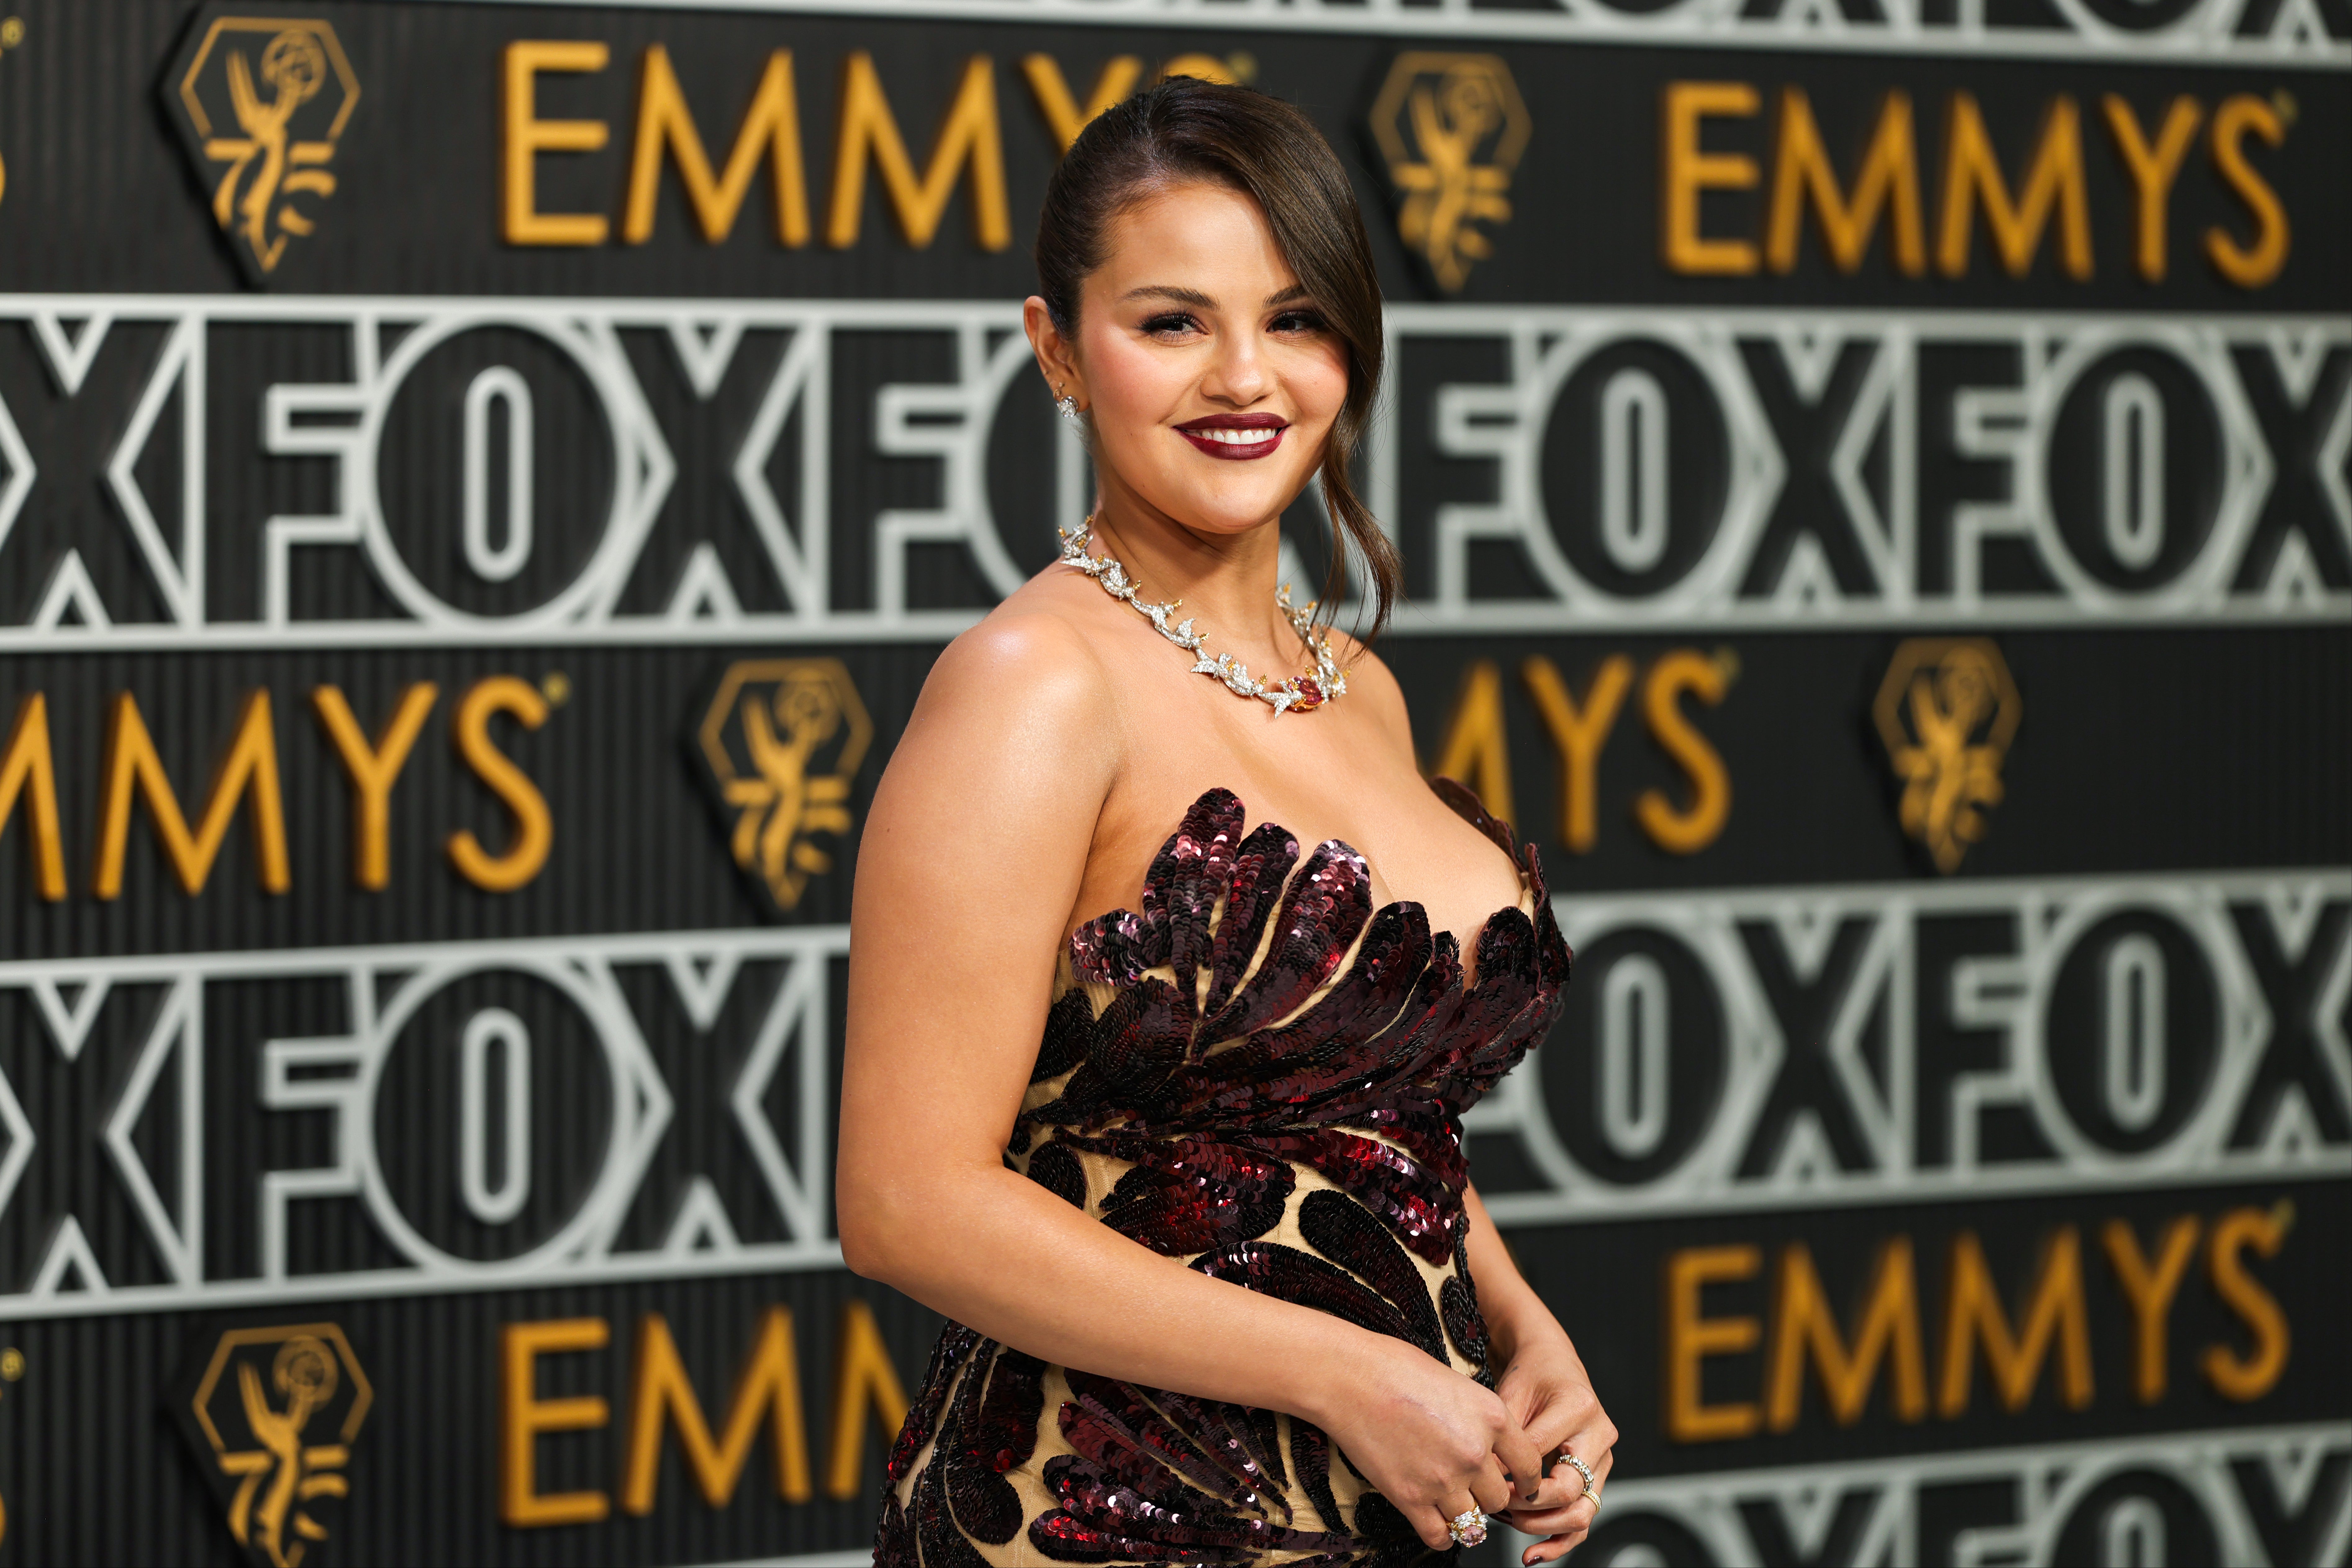 ‘Wizards of Waverly Place’ star Selena Gomez attends the Emmys in Los Angeles on 15 January 2024